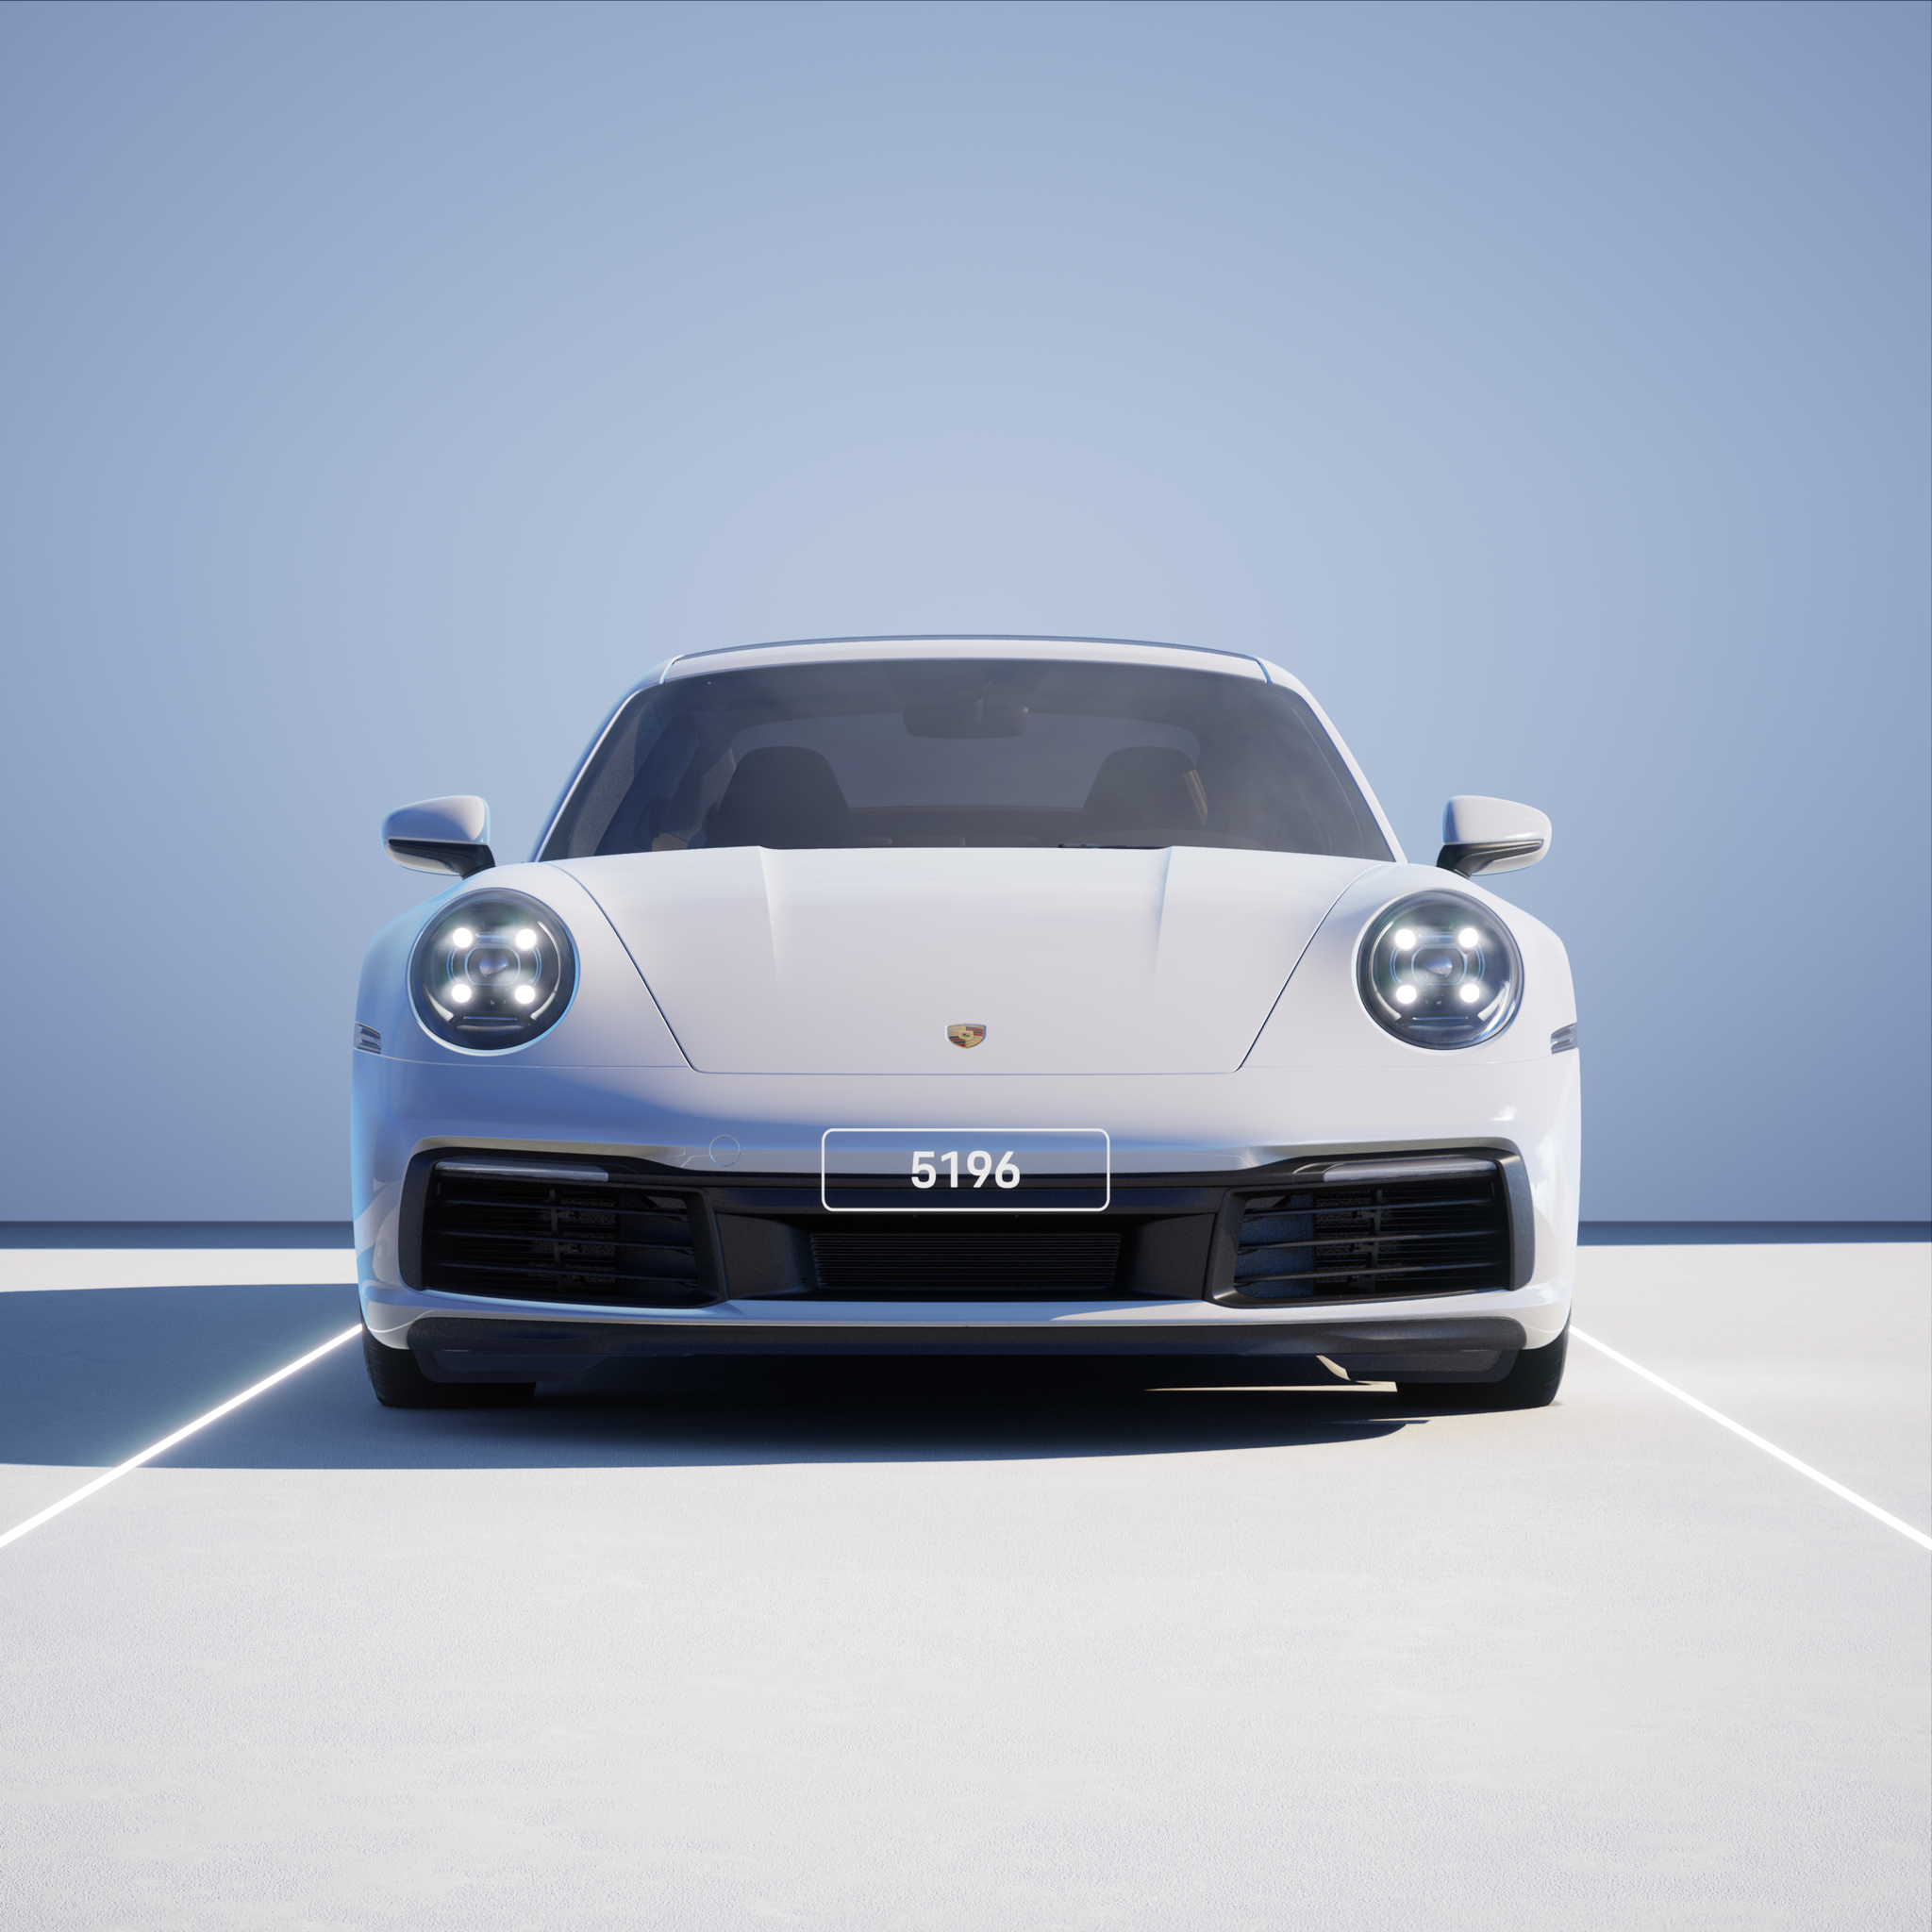 The PORSCHΞ 911 5196 image in phase